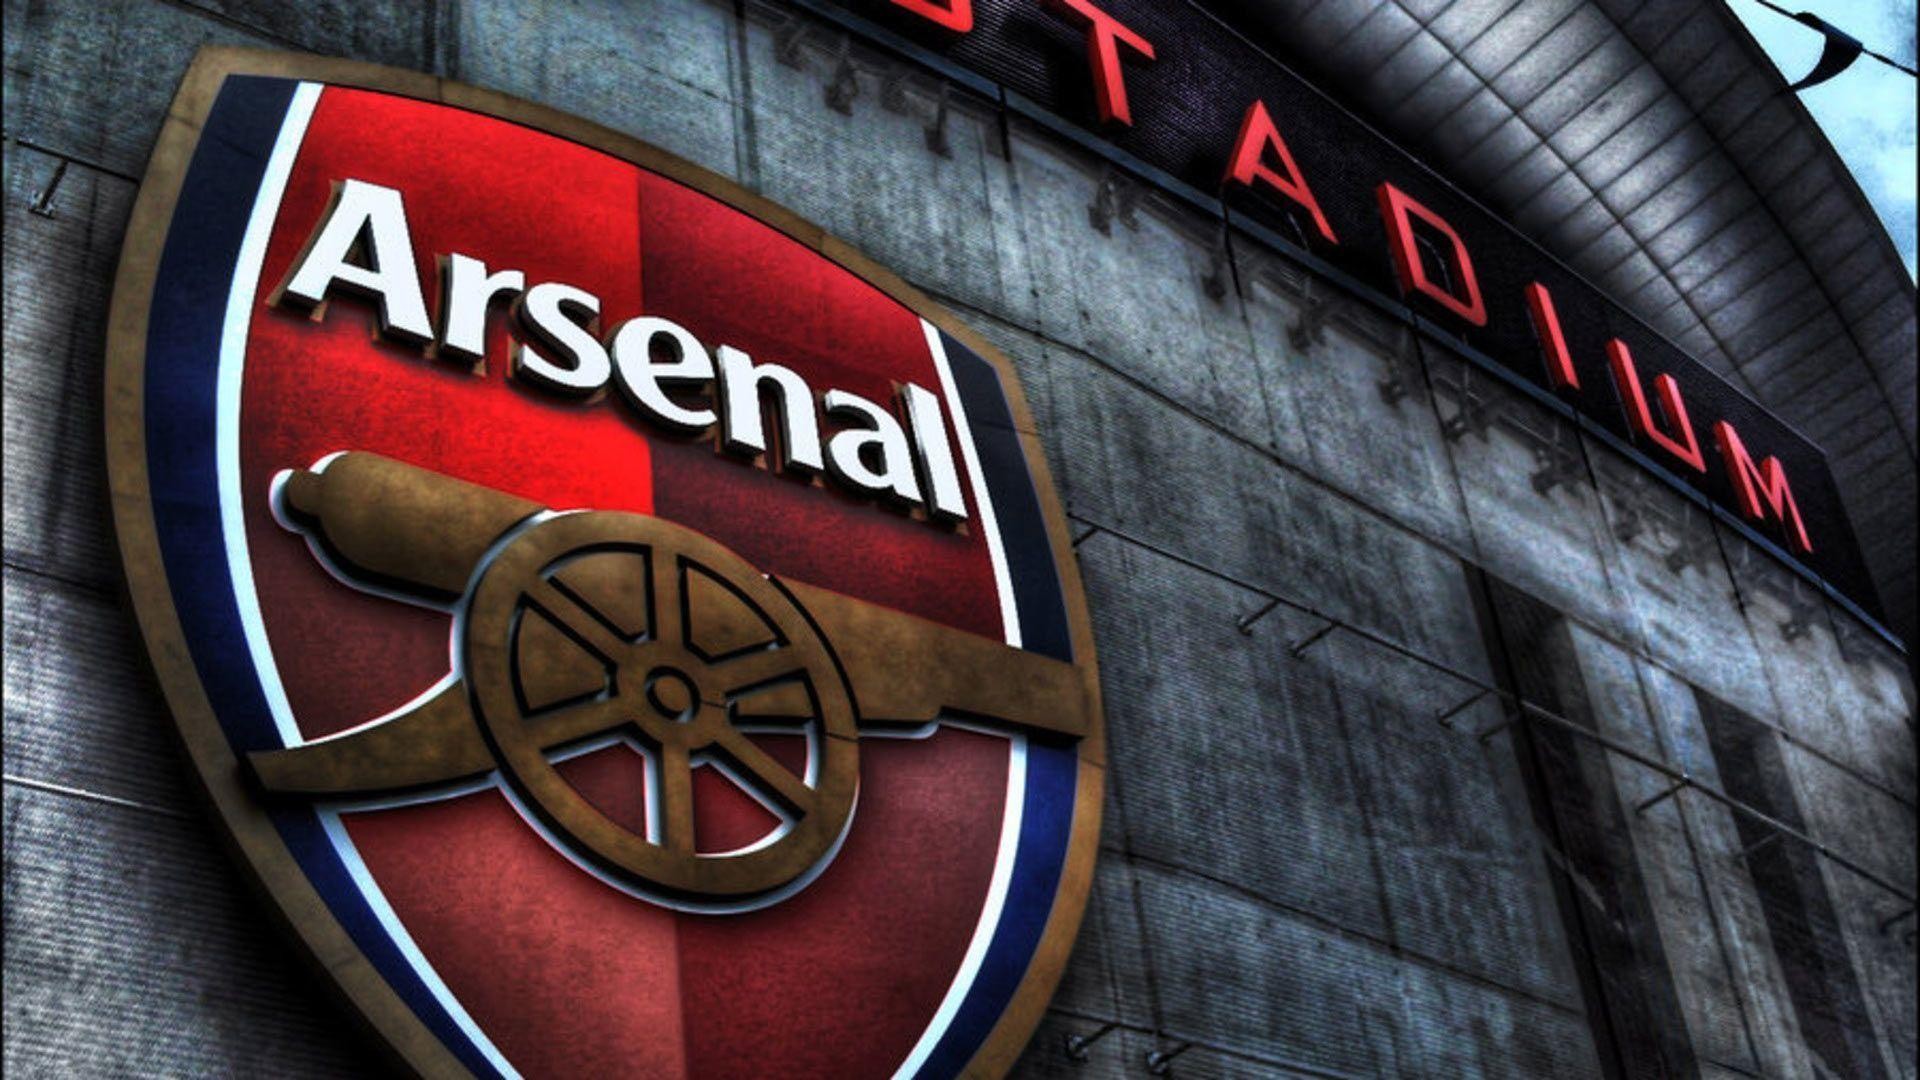 Arsenal Football Club For PC Wallpaper With high-resolution 1920X1080 pixel. You can use this wallpaper for your Desktop Computers, Mac Screensavers, Windows Backgrounds, iPhone Wallpapers, Tablet or Android Lock screen and another Mobile device